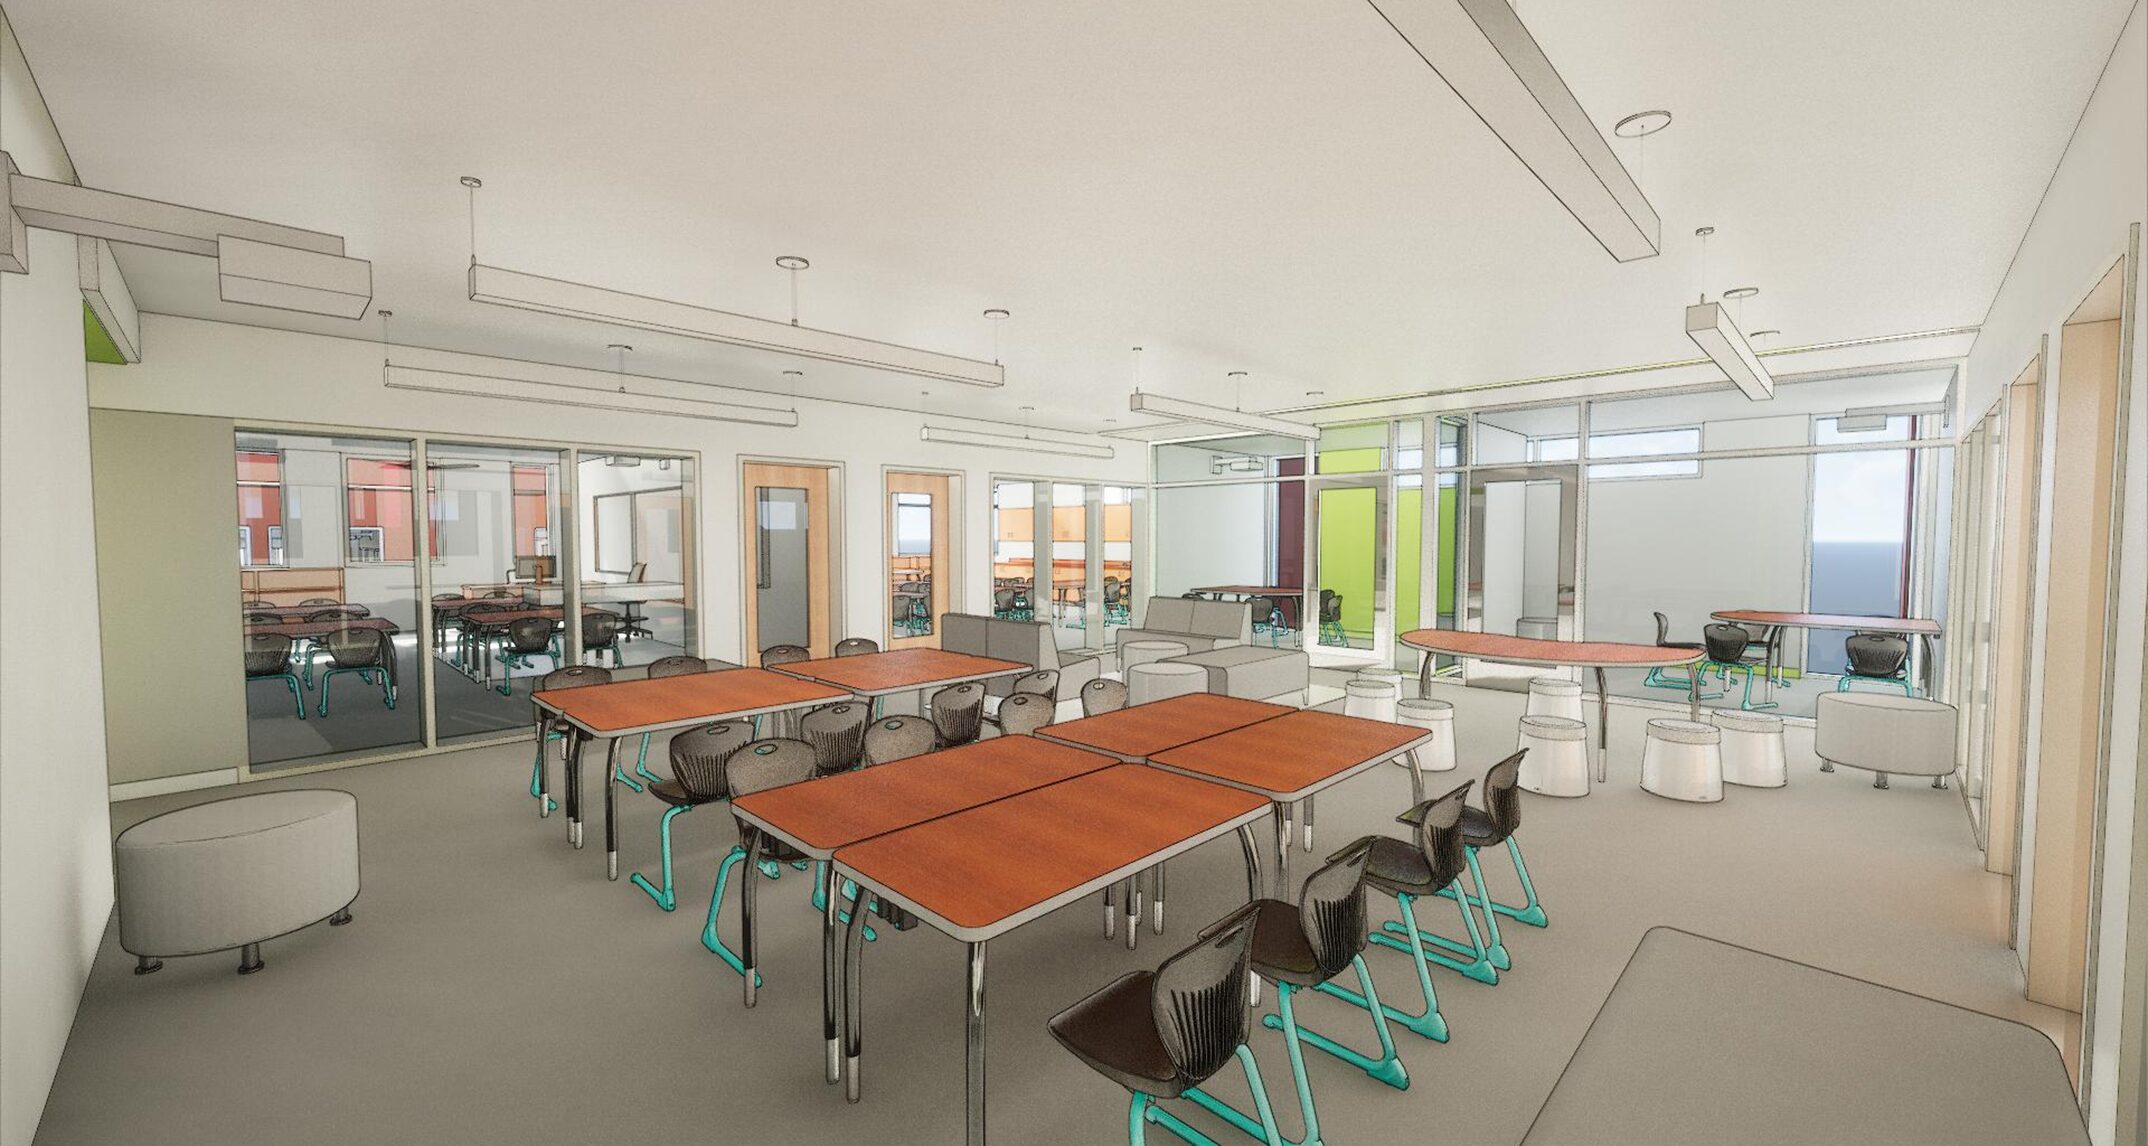 In addition to multiple larger collaboration areas placed
throughout the school, a smaller learning commons and adjacent to breakout
rooms provide areas for a range of ELL instruction. This learning commons is
placed prominently at the intersection of grade level pods, providing
visibility and access to the rest of the school. 